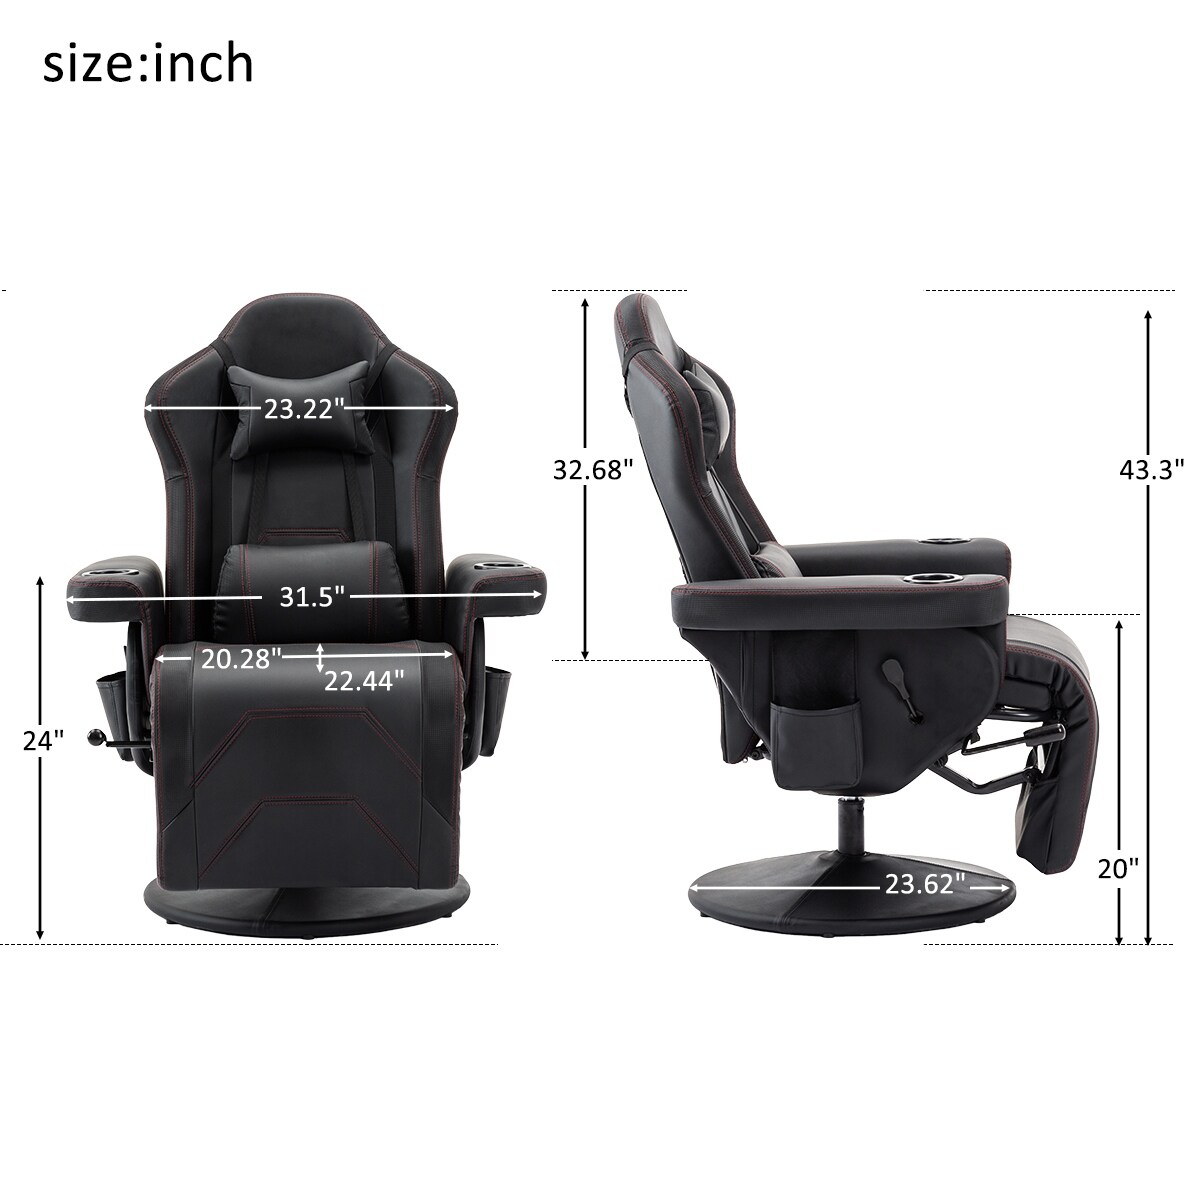 https://ak1.ostkcdn.com/images/products/is/images/direct/0500799096fa16fdeeee54c5f0b54b2d3d7f0ff2/Recliner-Gaming-Chair%2CAdjustable-headrest%2Clumbar-support.jpg